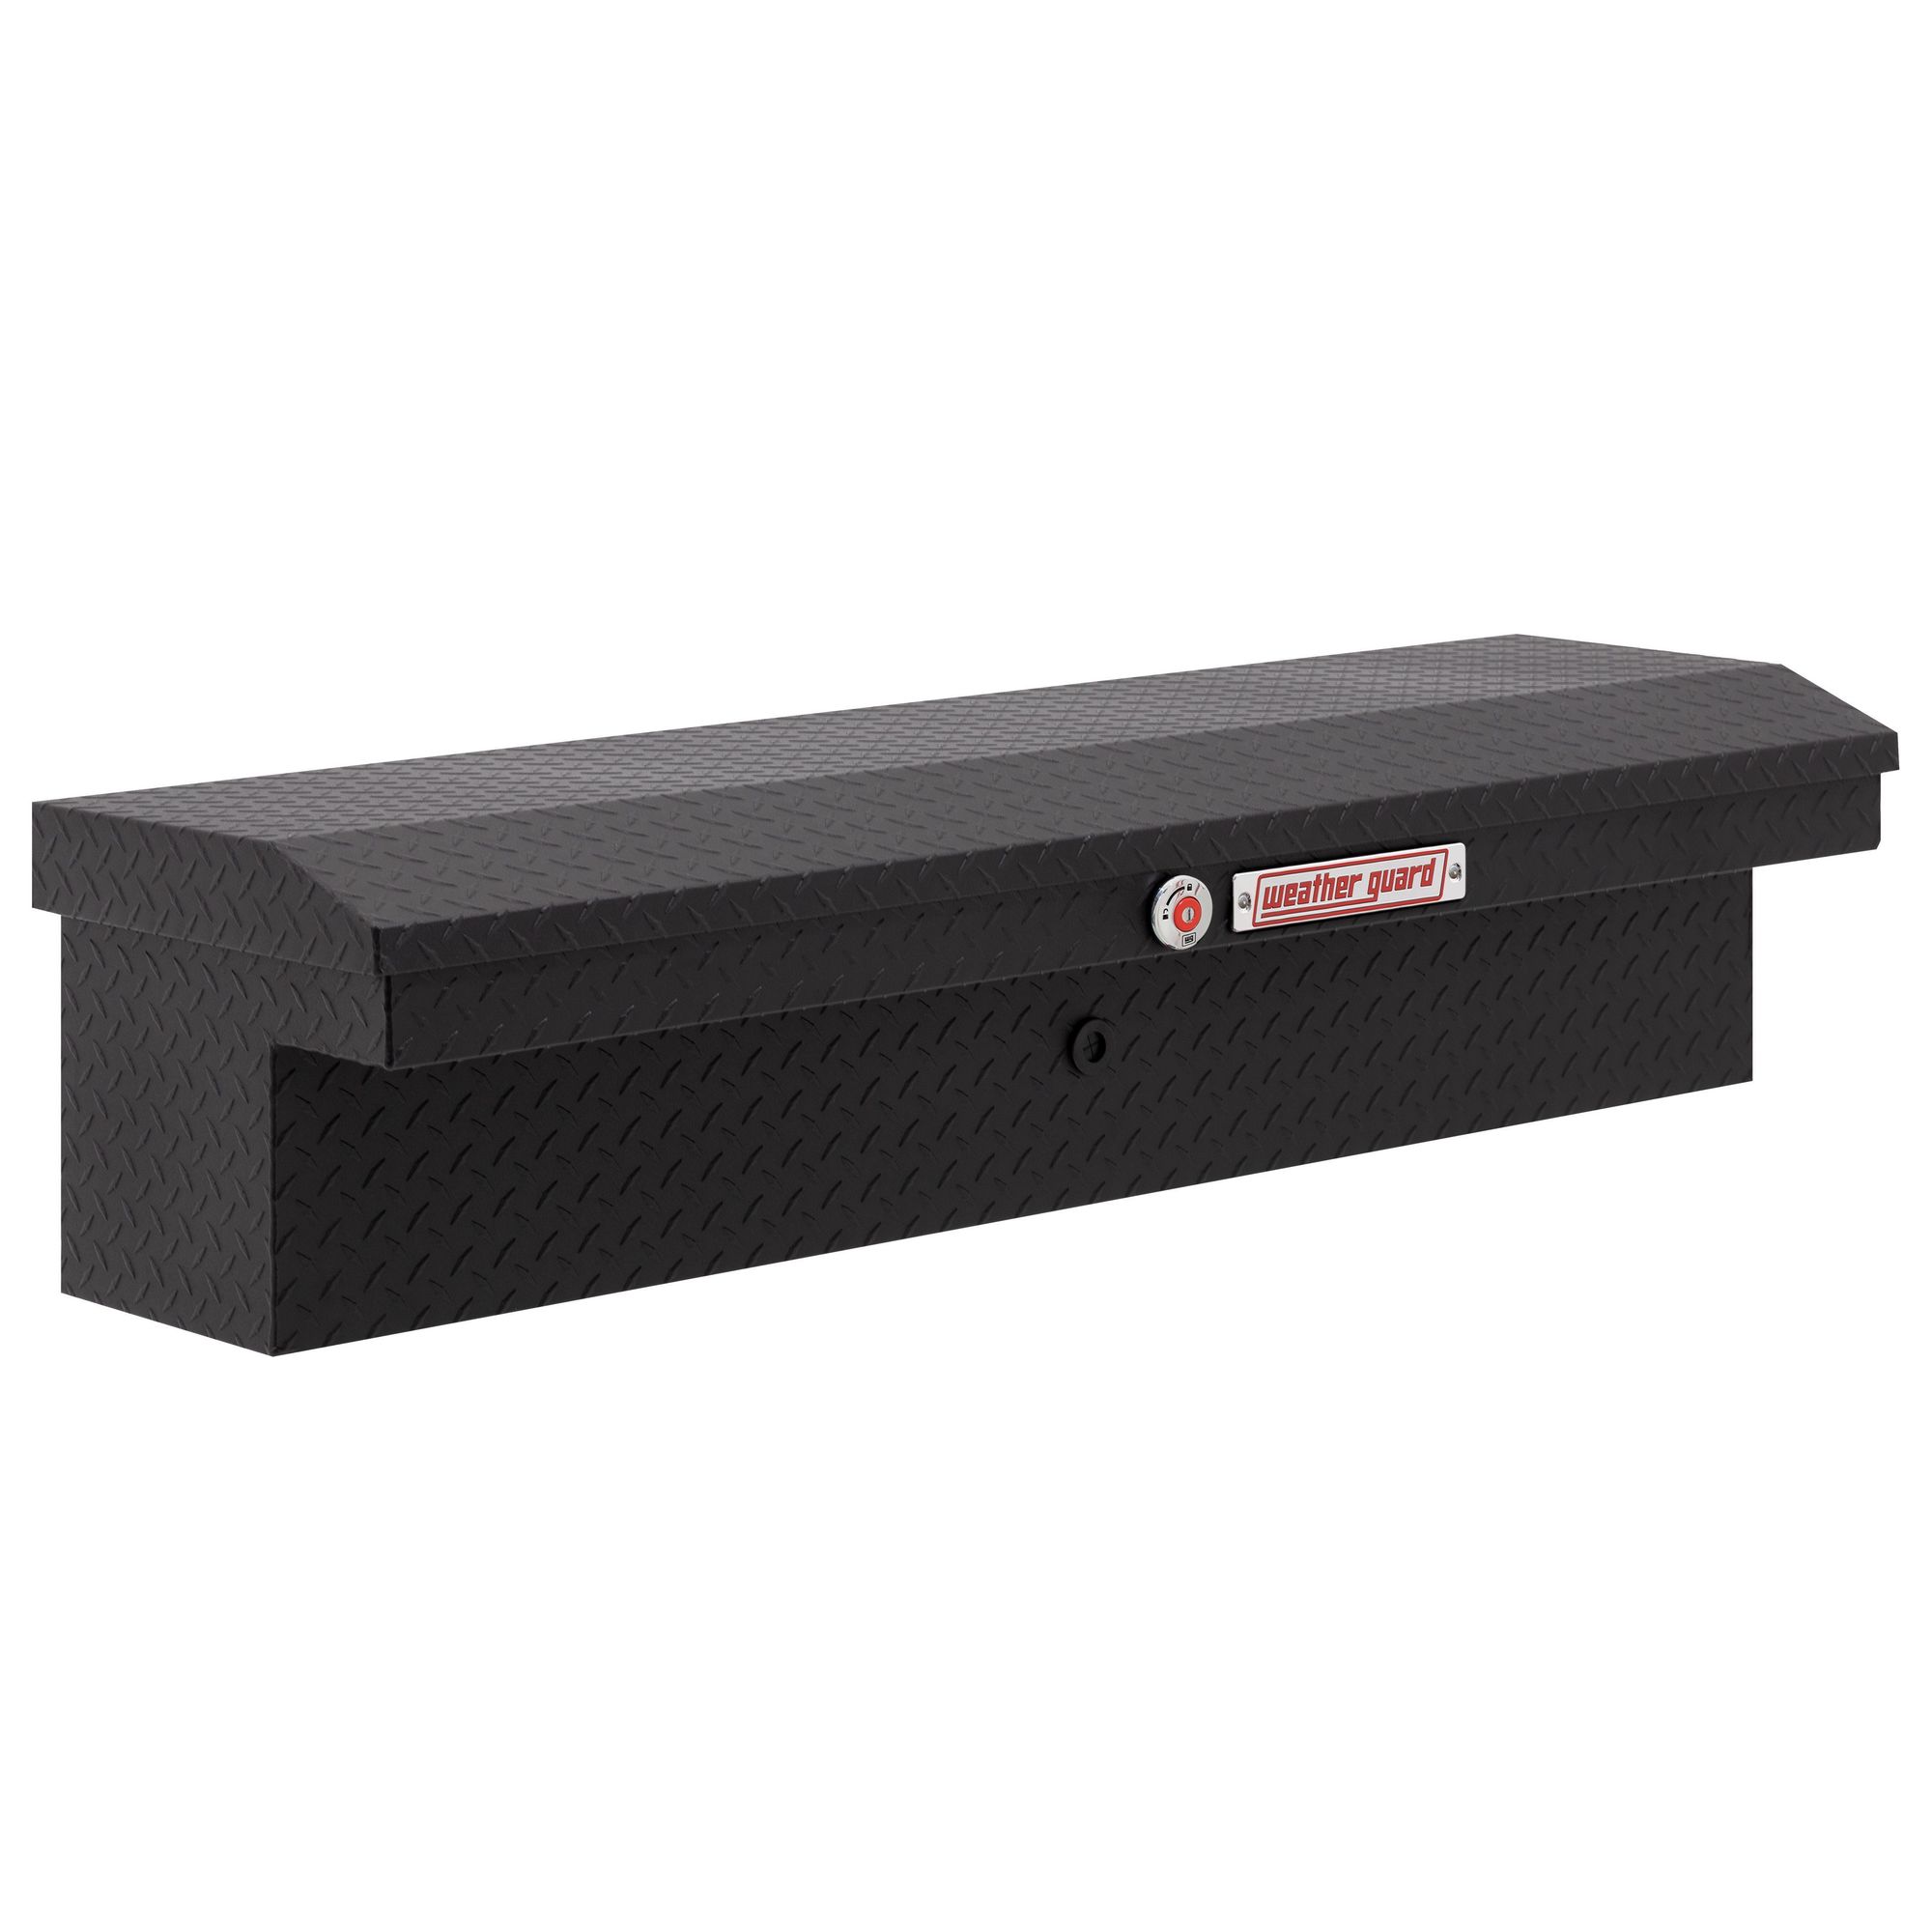 Weather Guard, 56Inch L Low Profile, Lo-Side Box, Width 56 in, Material Aluminum, Color Finish Textured Matte Black, Model 178-52-04